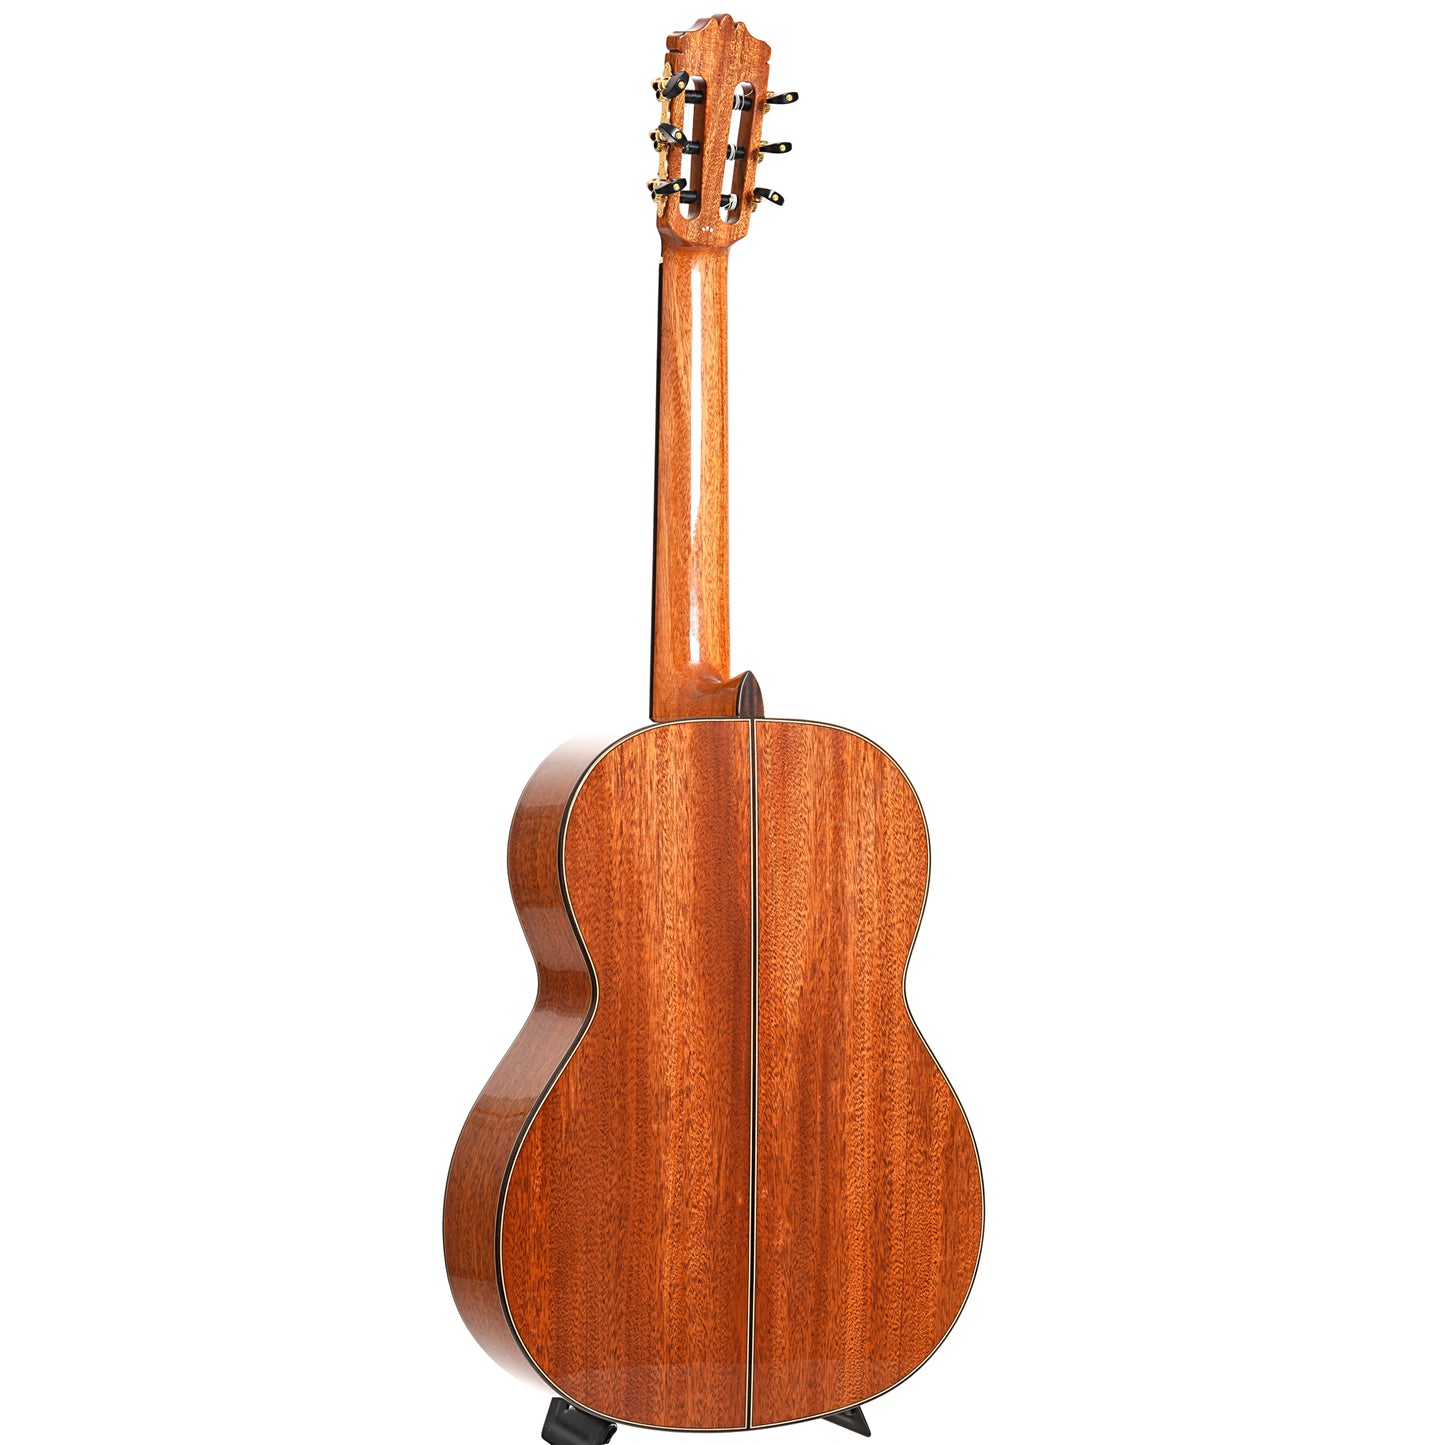 Image 12 of Cordoba C9 Classical Guitar and Case - SKU# CORC9C : Product Type Classical & Flamenco Guitars : Elderly Instruments